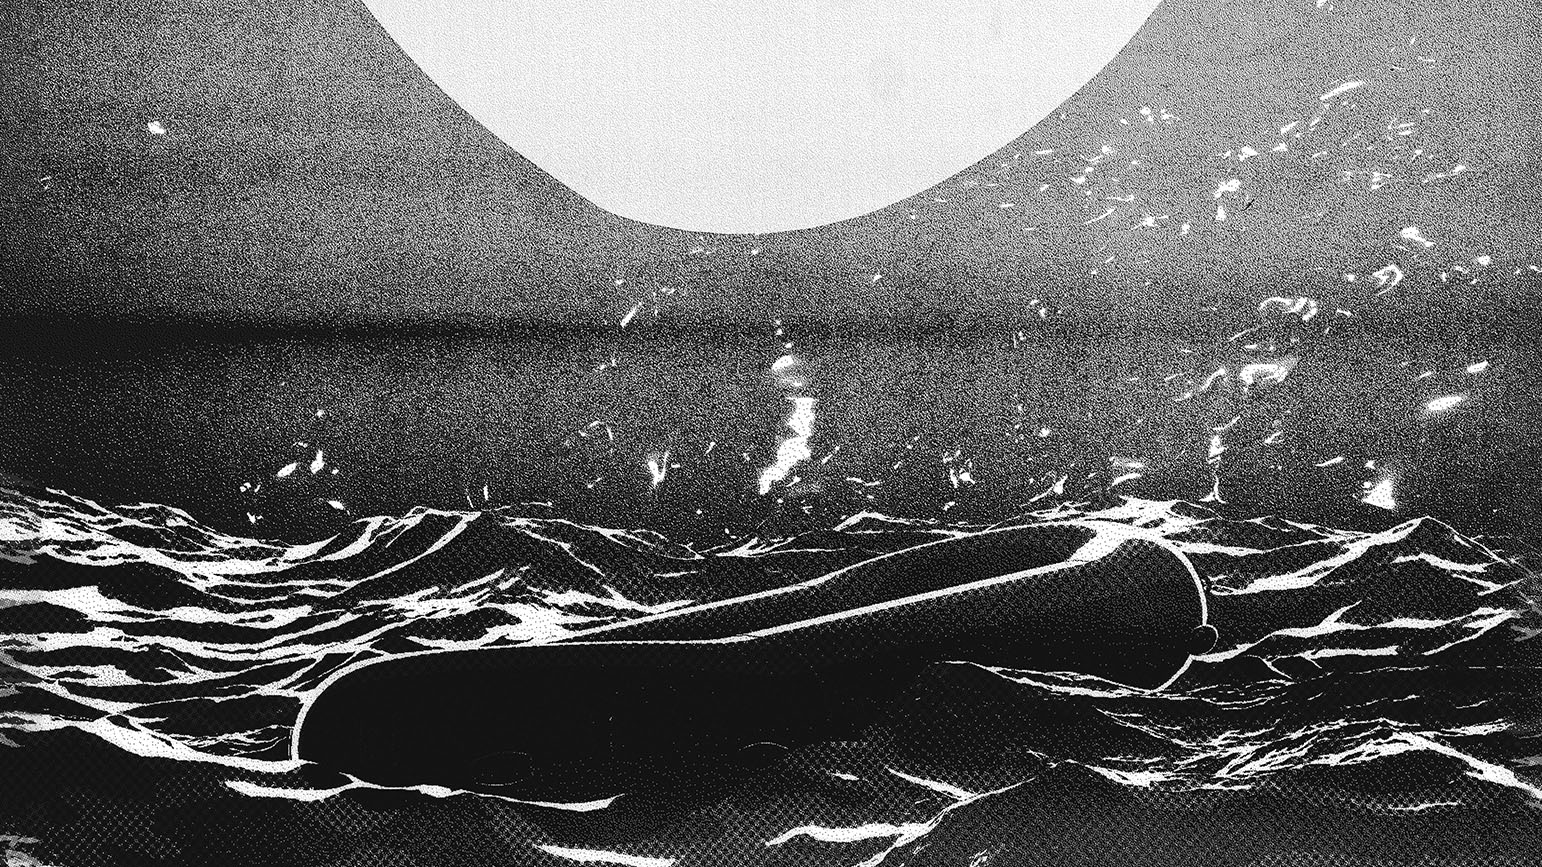 Digital black and white image of a raft on rough water under an oversized moon